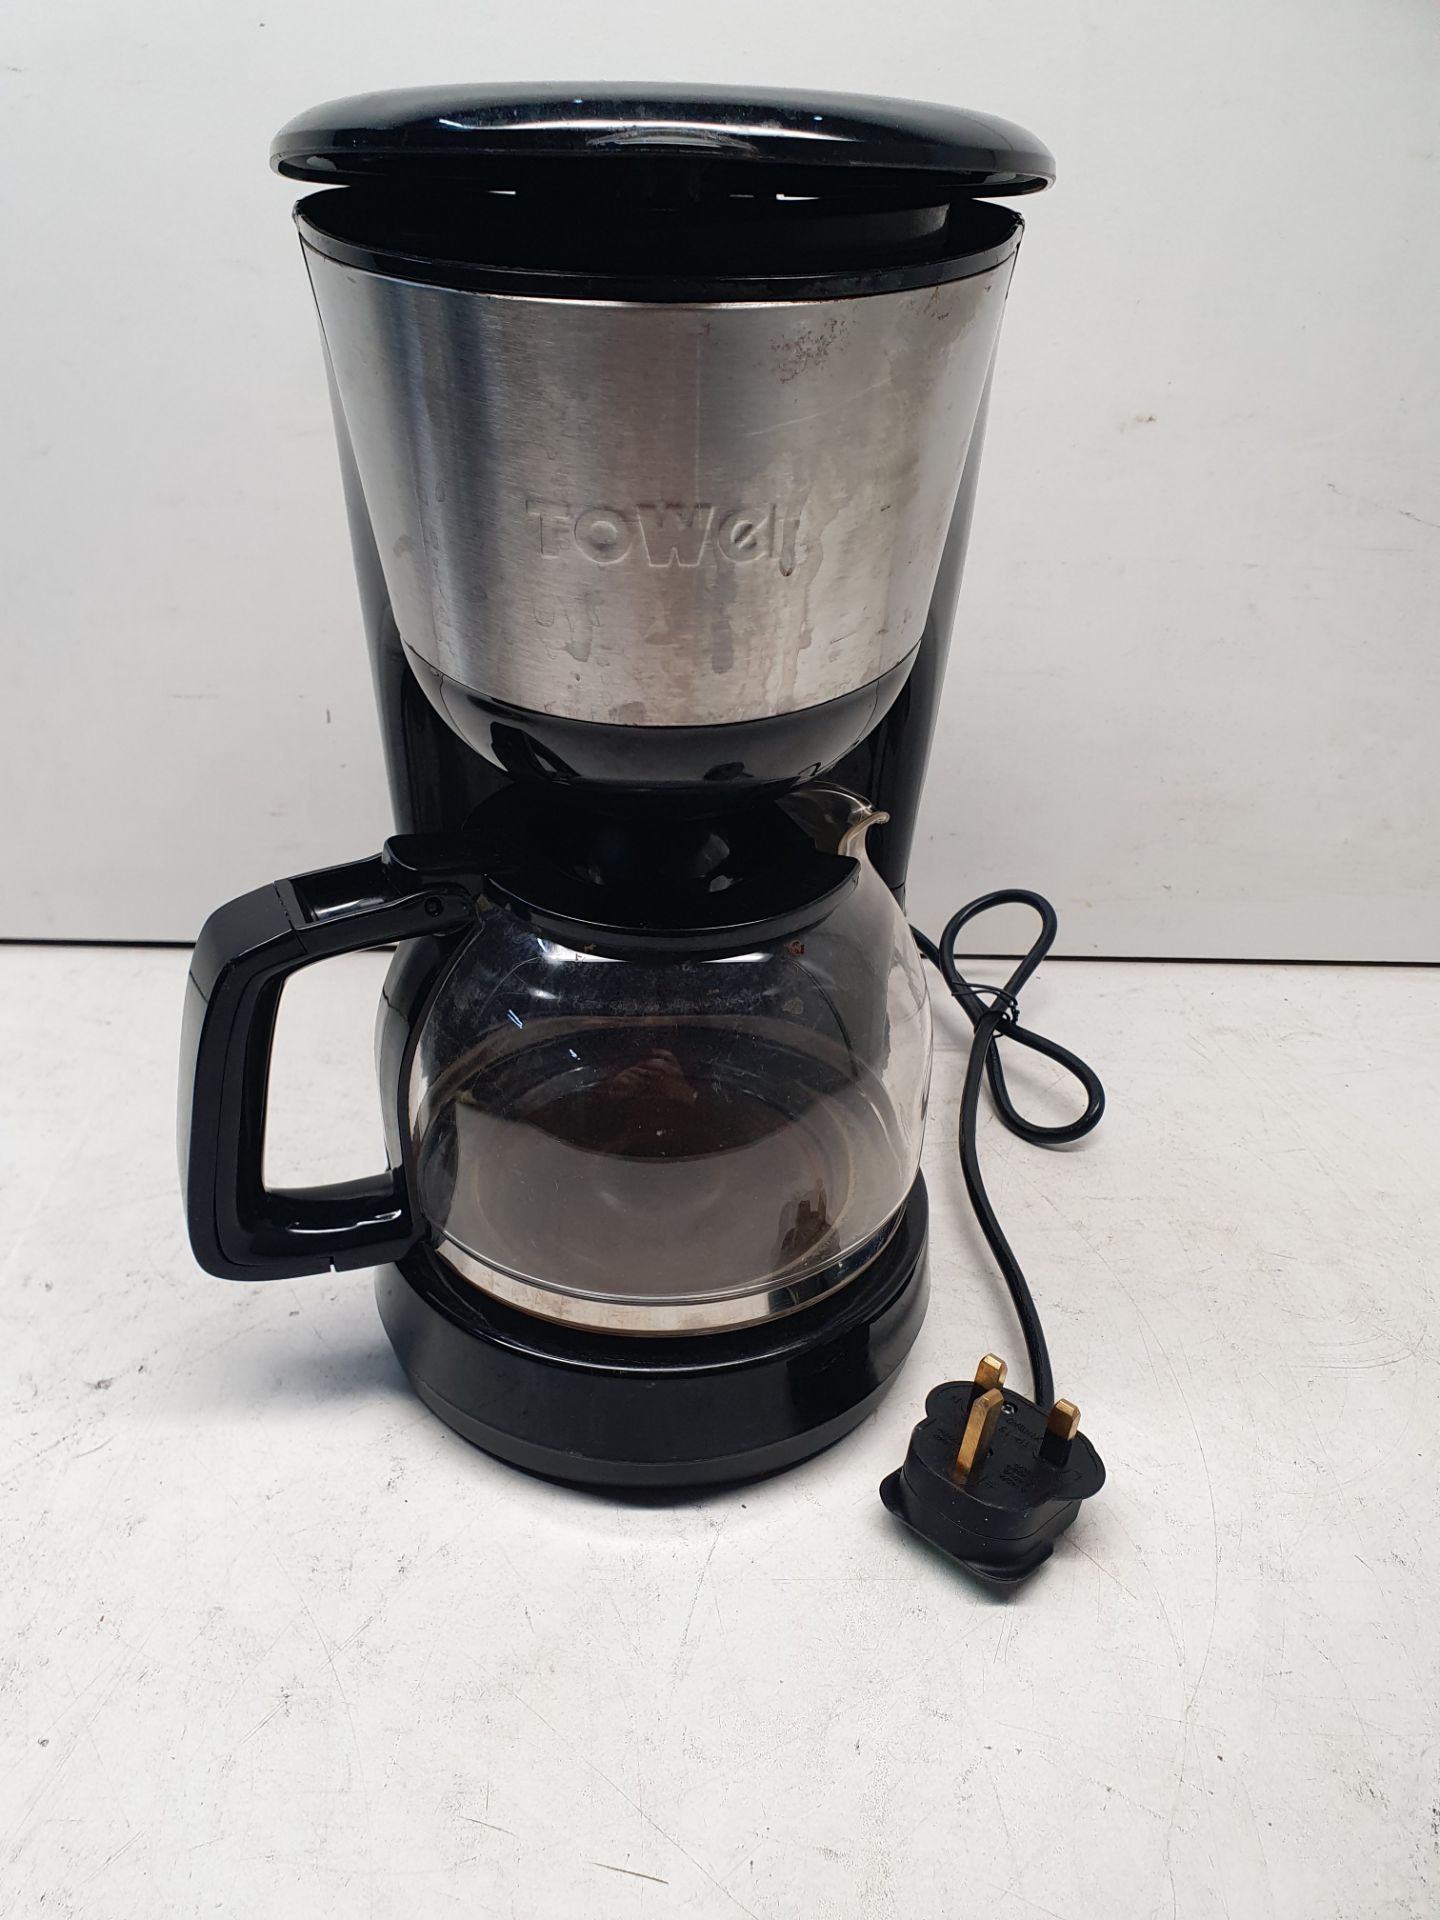 Tower T13001 10 Cup Coffee Maker with Keep Warm Function